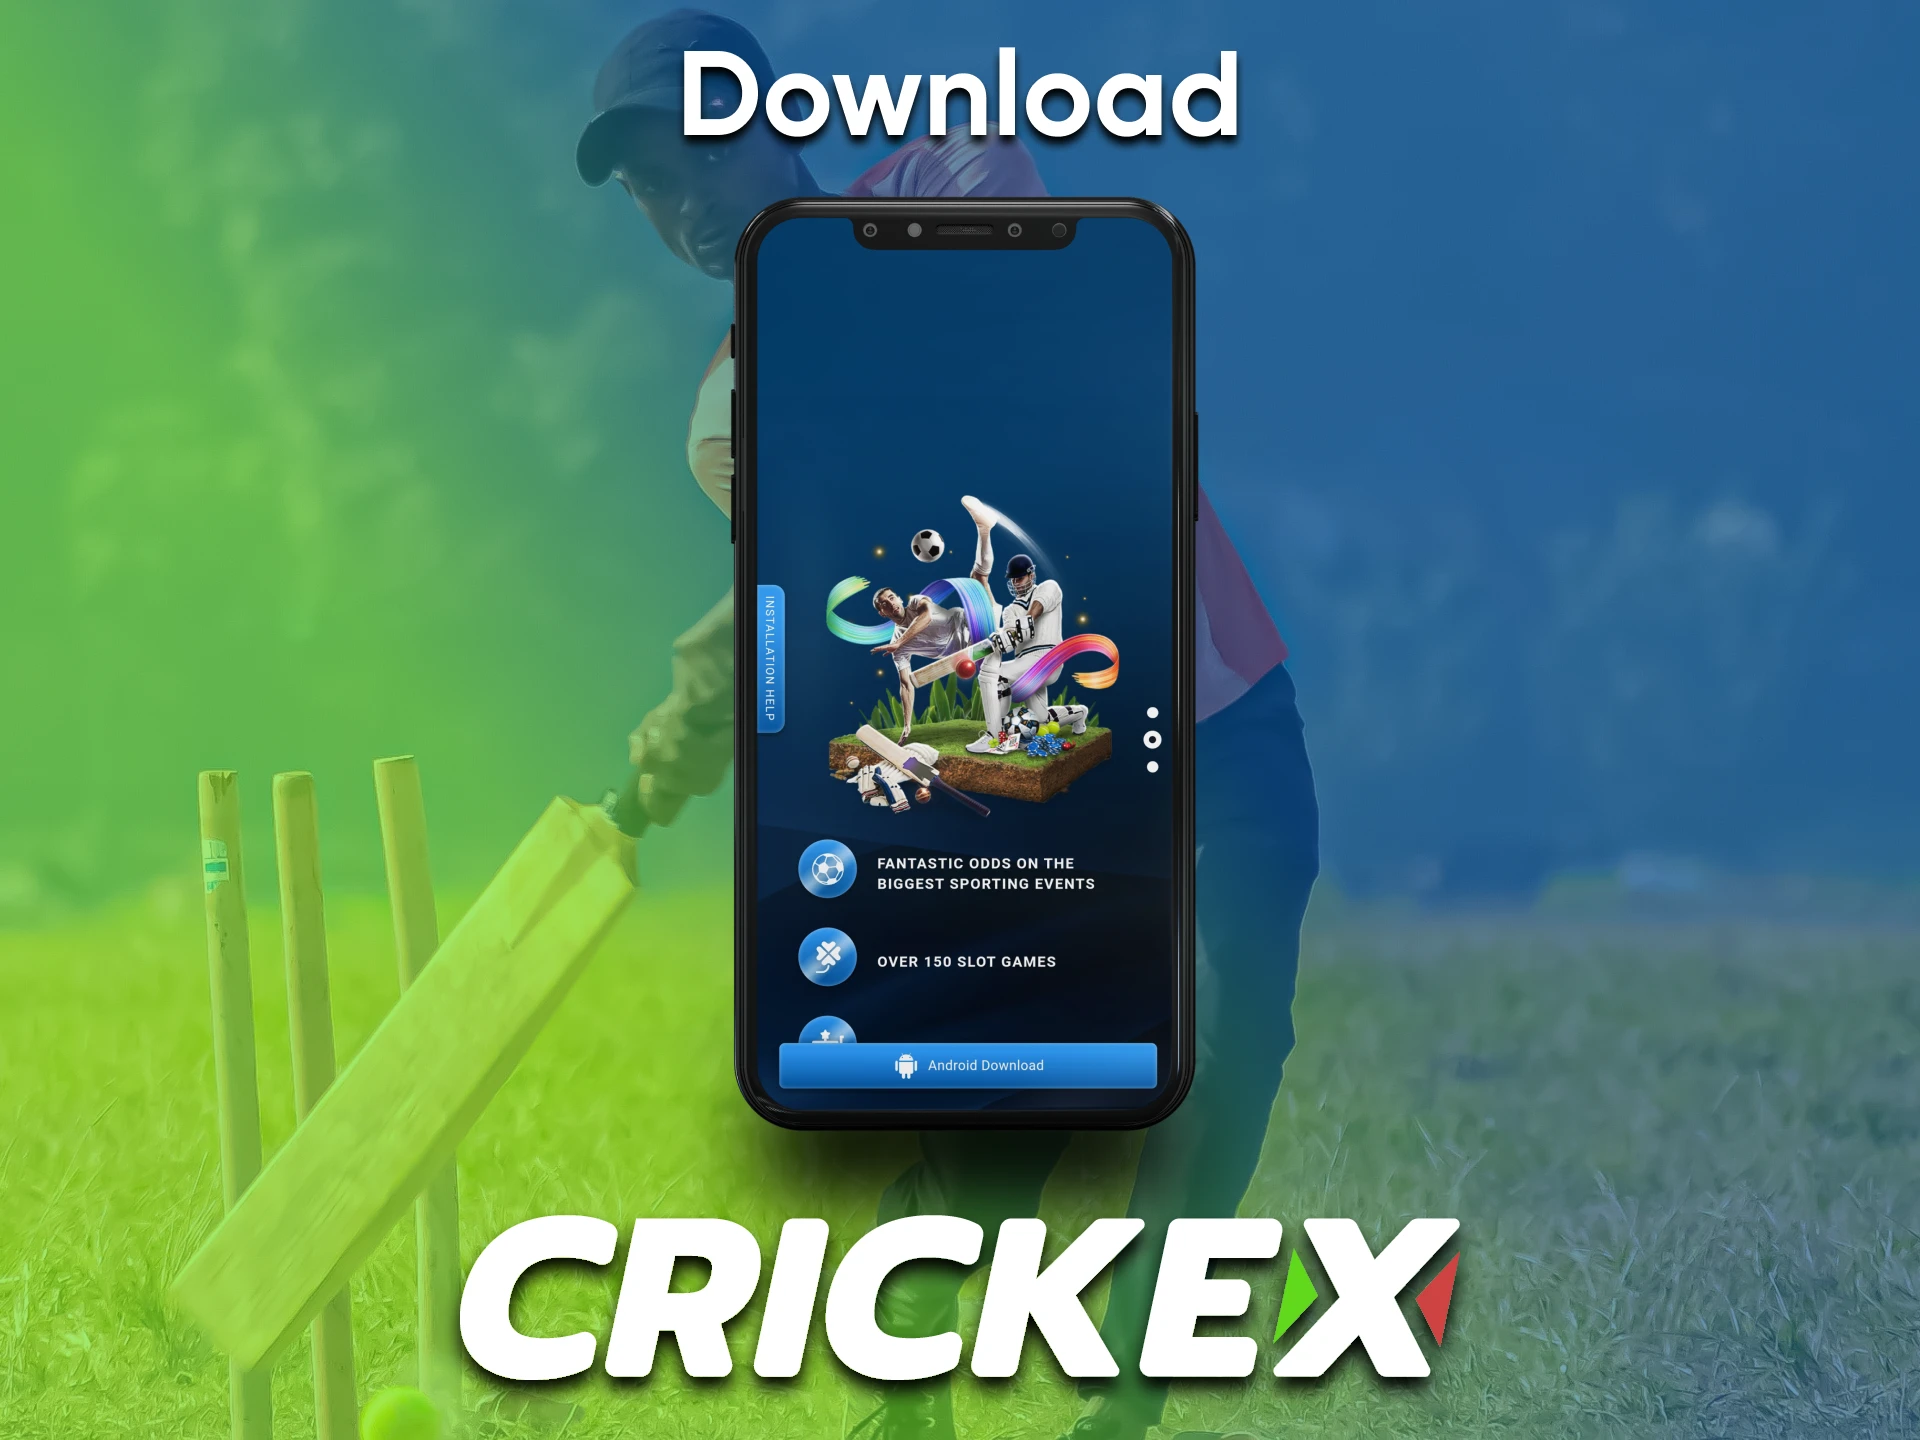 To download the Crickex application, you need to go to the desired section.